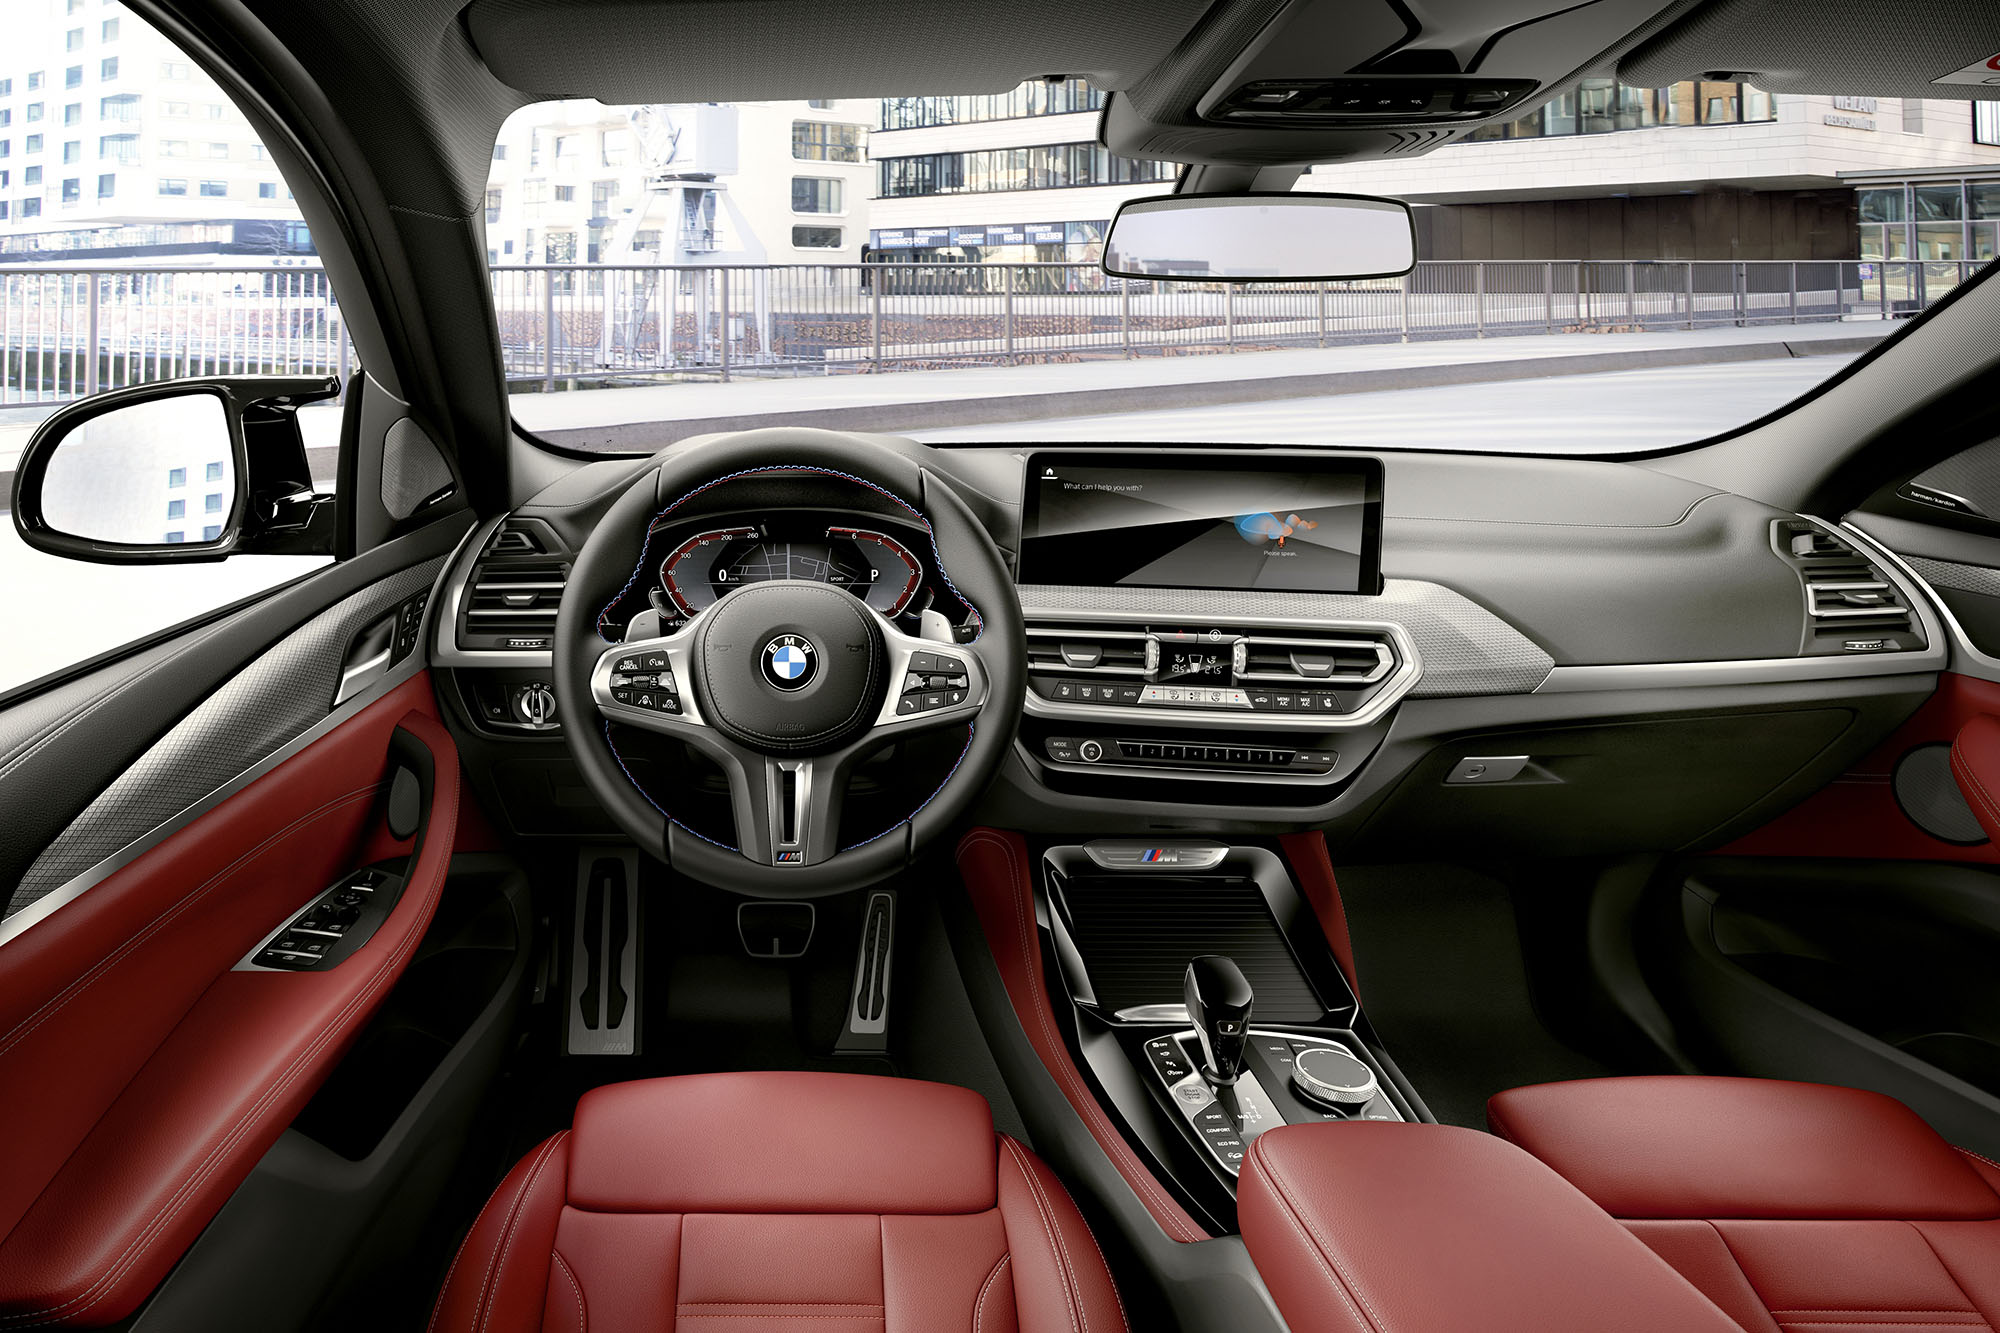 BMW X4 interior and red seats